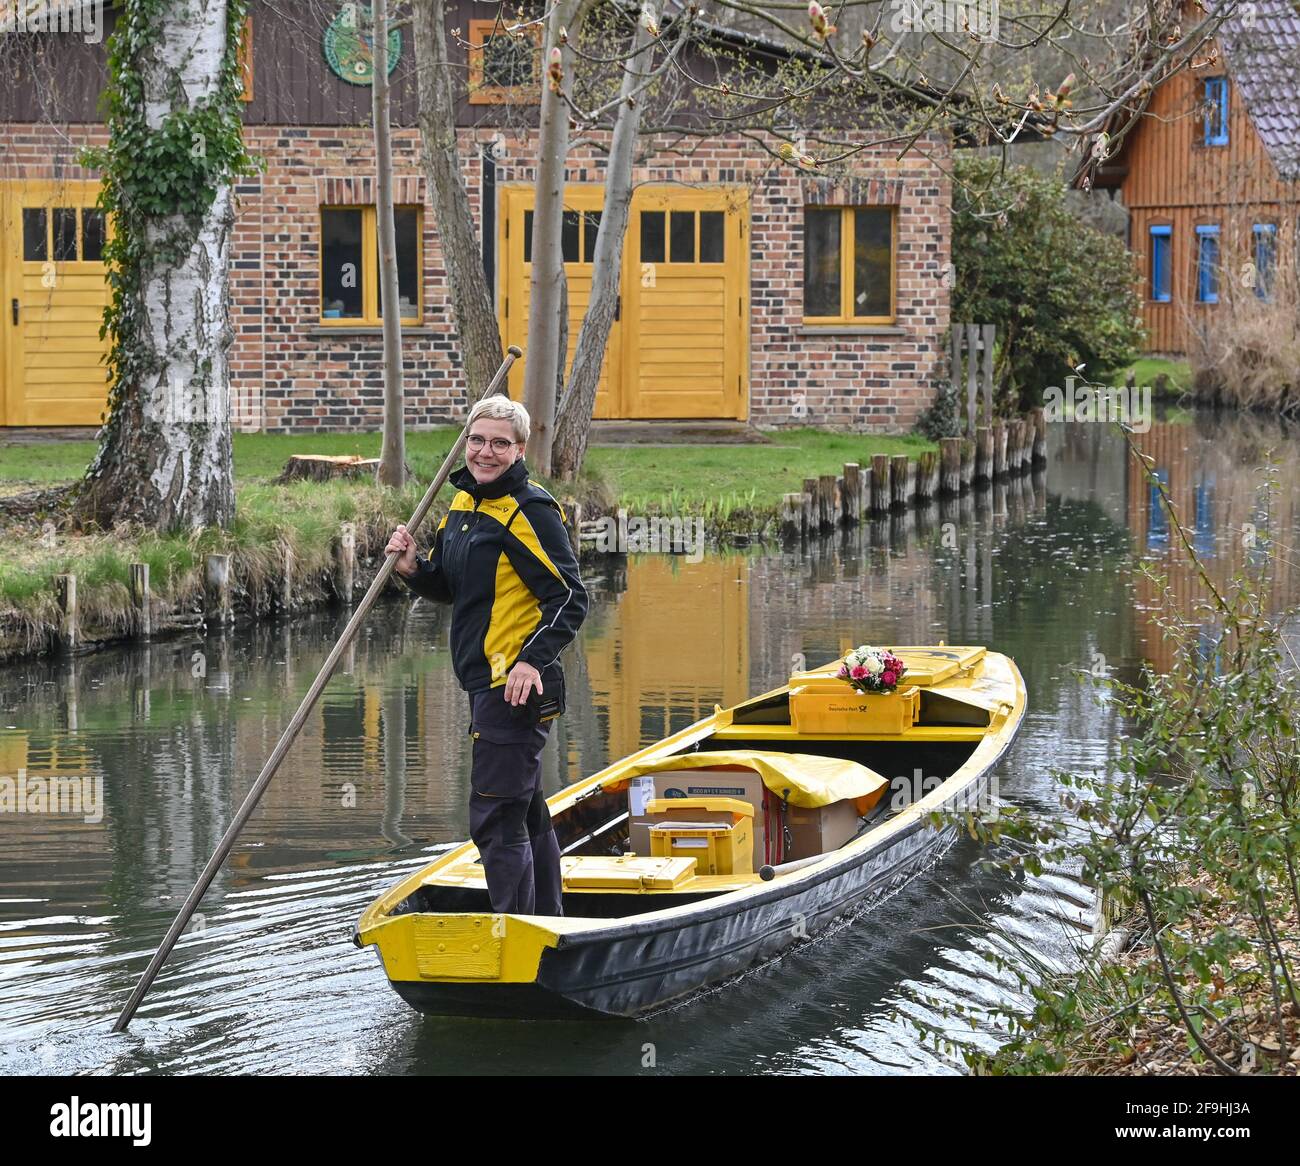 14 April 2021, Brandenburg, Lübbenau: Andrea Bunar, mail carrier, drives her yellow mail barge across a river (waterway in the Spreewald) at the start of the mail delivery season. Mail carrier Andrea Bunar is bringing a bit of normalcy to the Spreewald during the Corona pandemic: since Wednesday, she has been delivering letters and parcels to residents again with her barge. Some things have fortunately remained the same, such as the unspoiled nature in the Spreewald, said Bunar at the start on the water. The 50-year-old delivers to 65 households; she steers her barge on the eight-kilometer tou Stock Photo